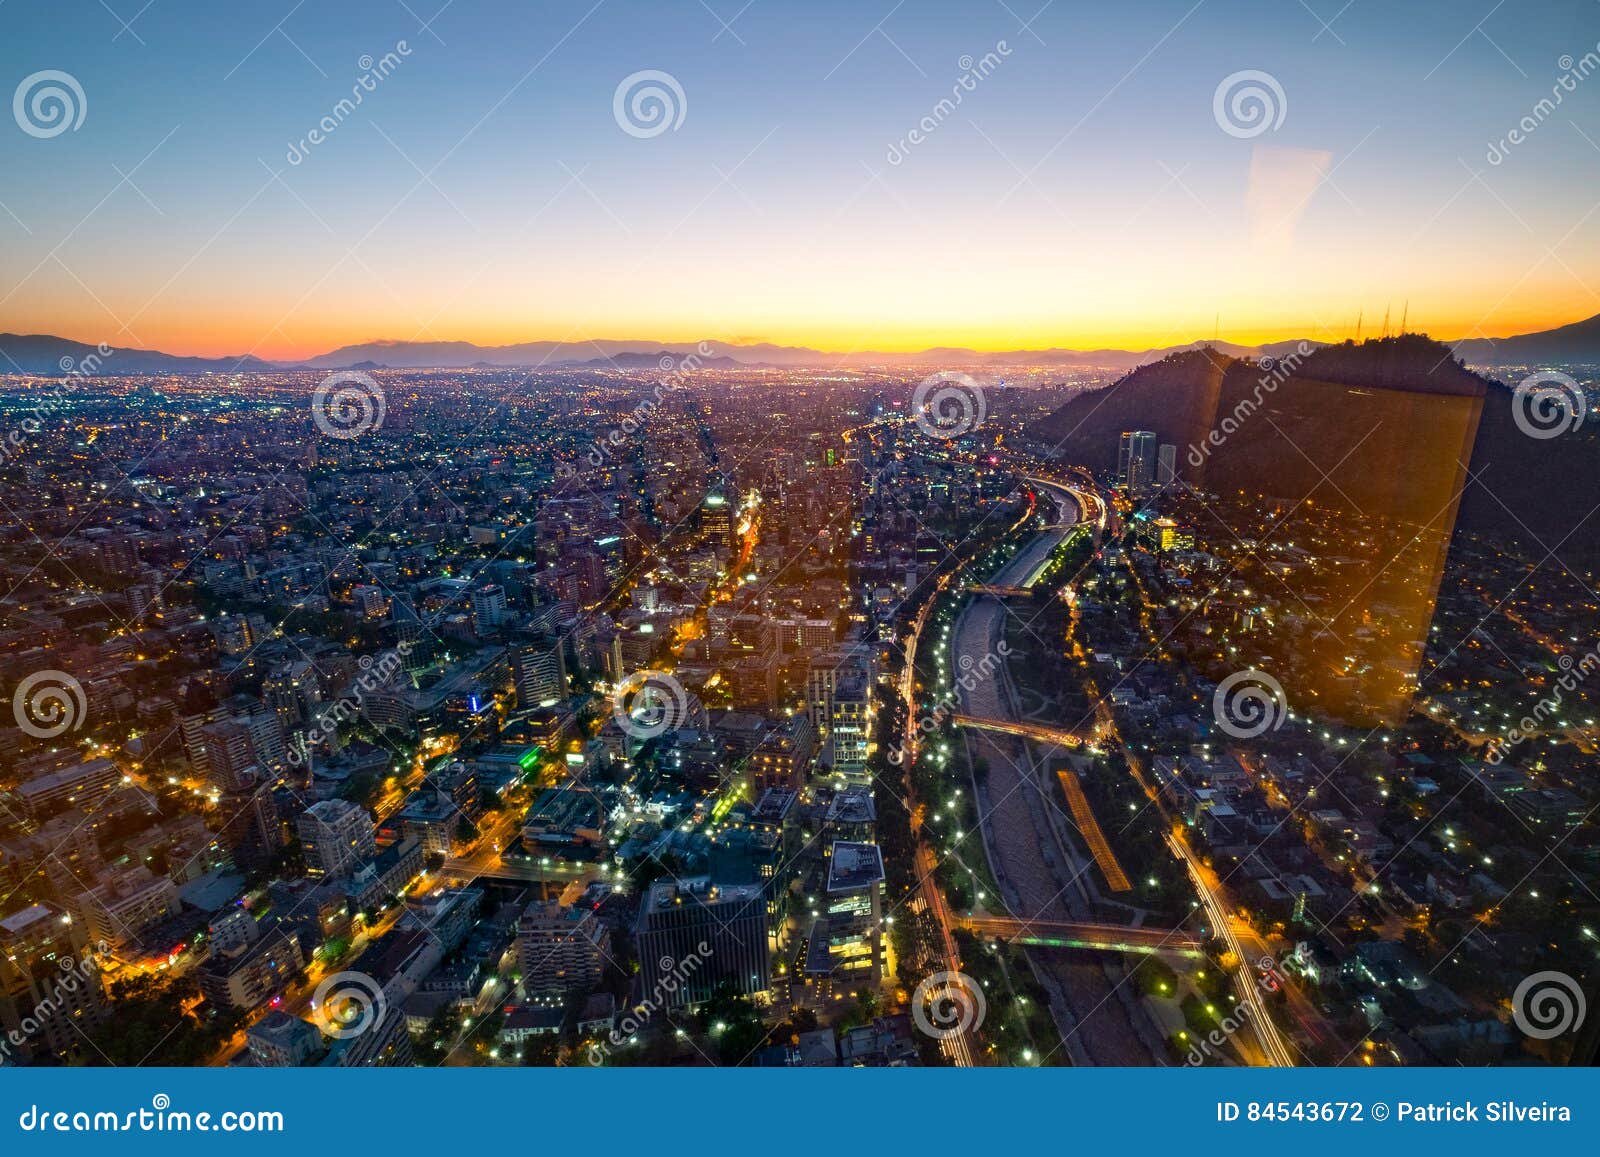 santiago of chile aerial view from the costanera center at sunset